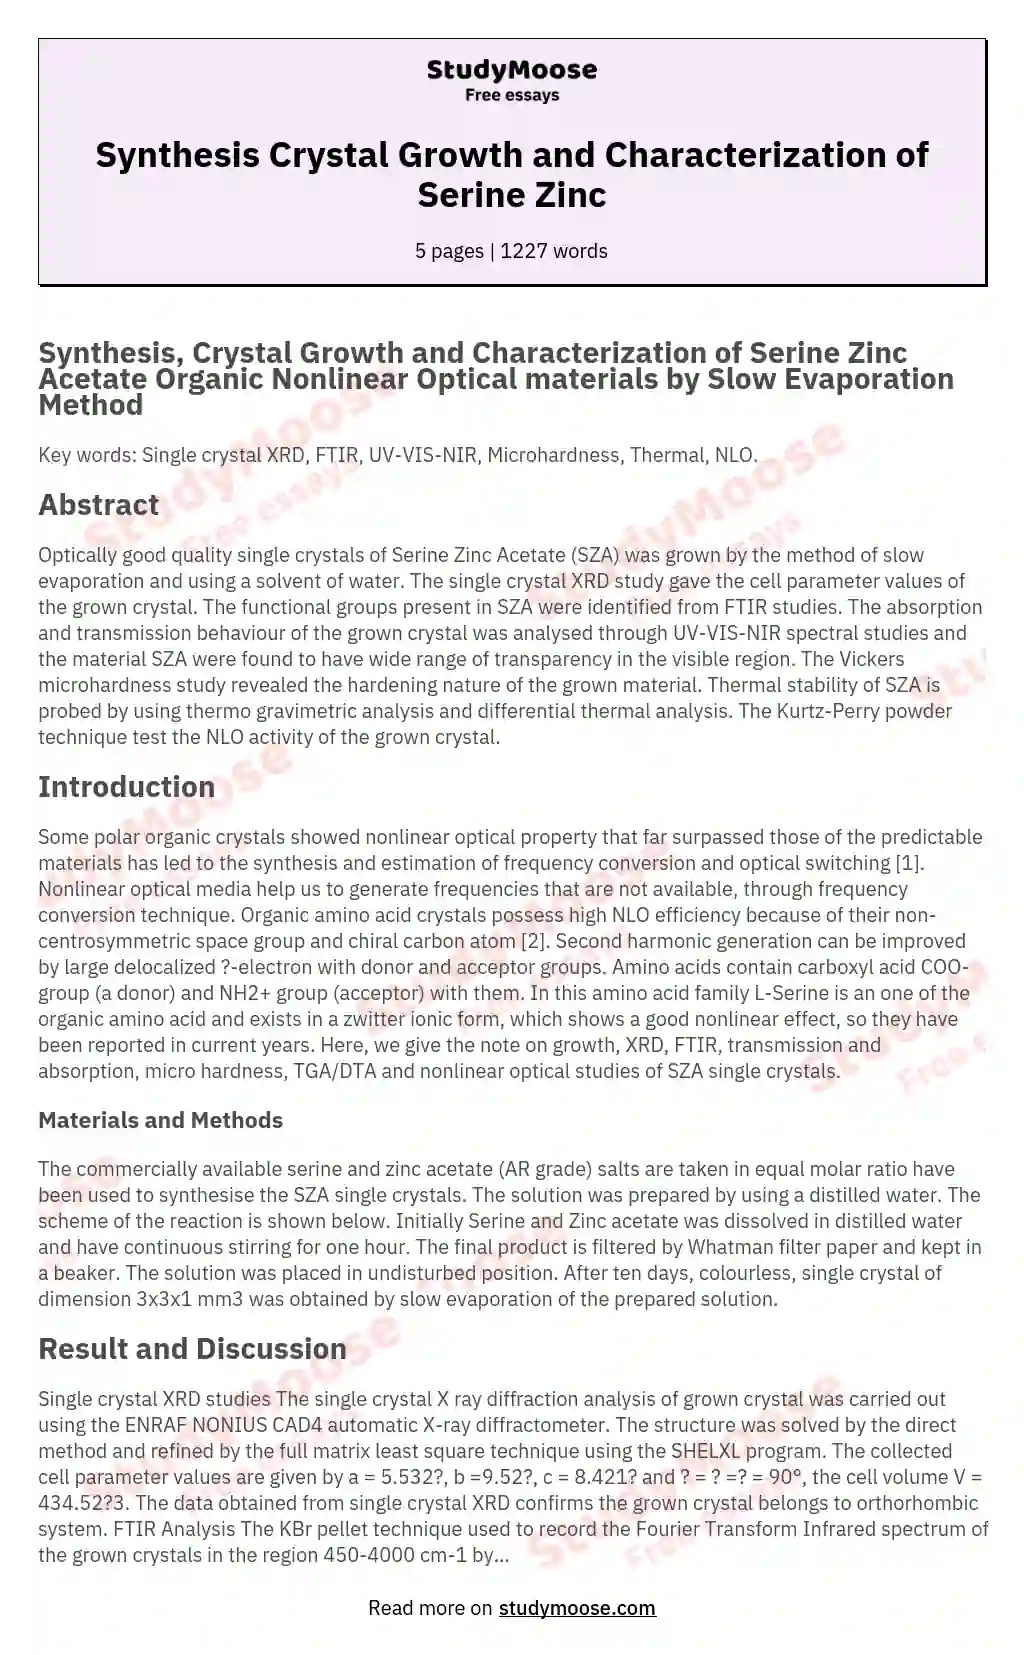 Synthesis Crystal Growth and Characterization of Serine Zinc essay